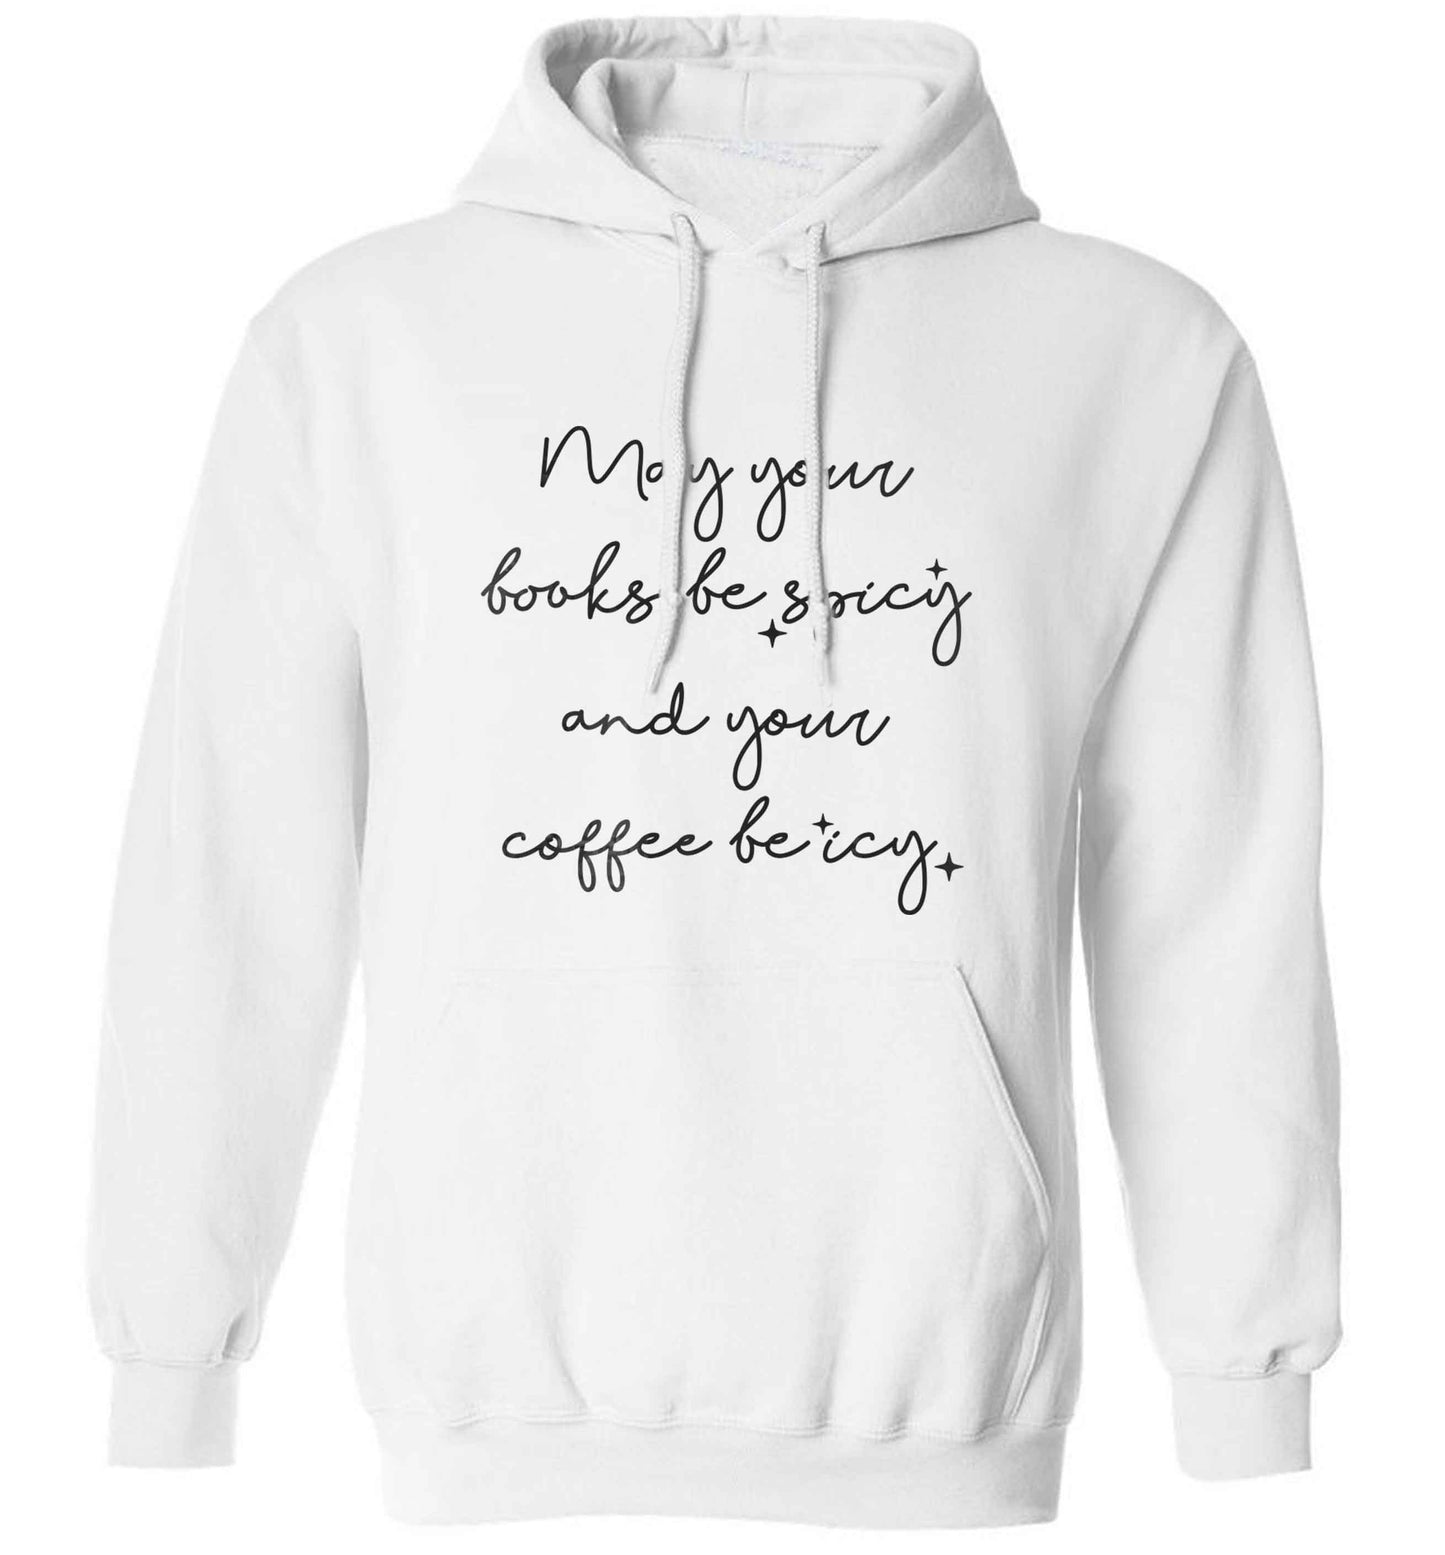 May your books be spicy and your coffee be icy adults unisex white hoodie 2XL